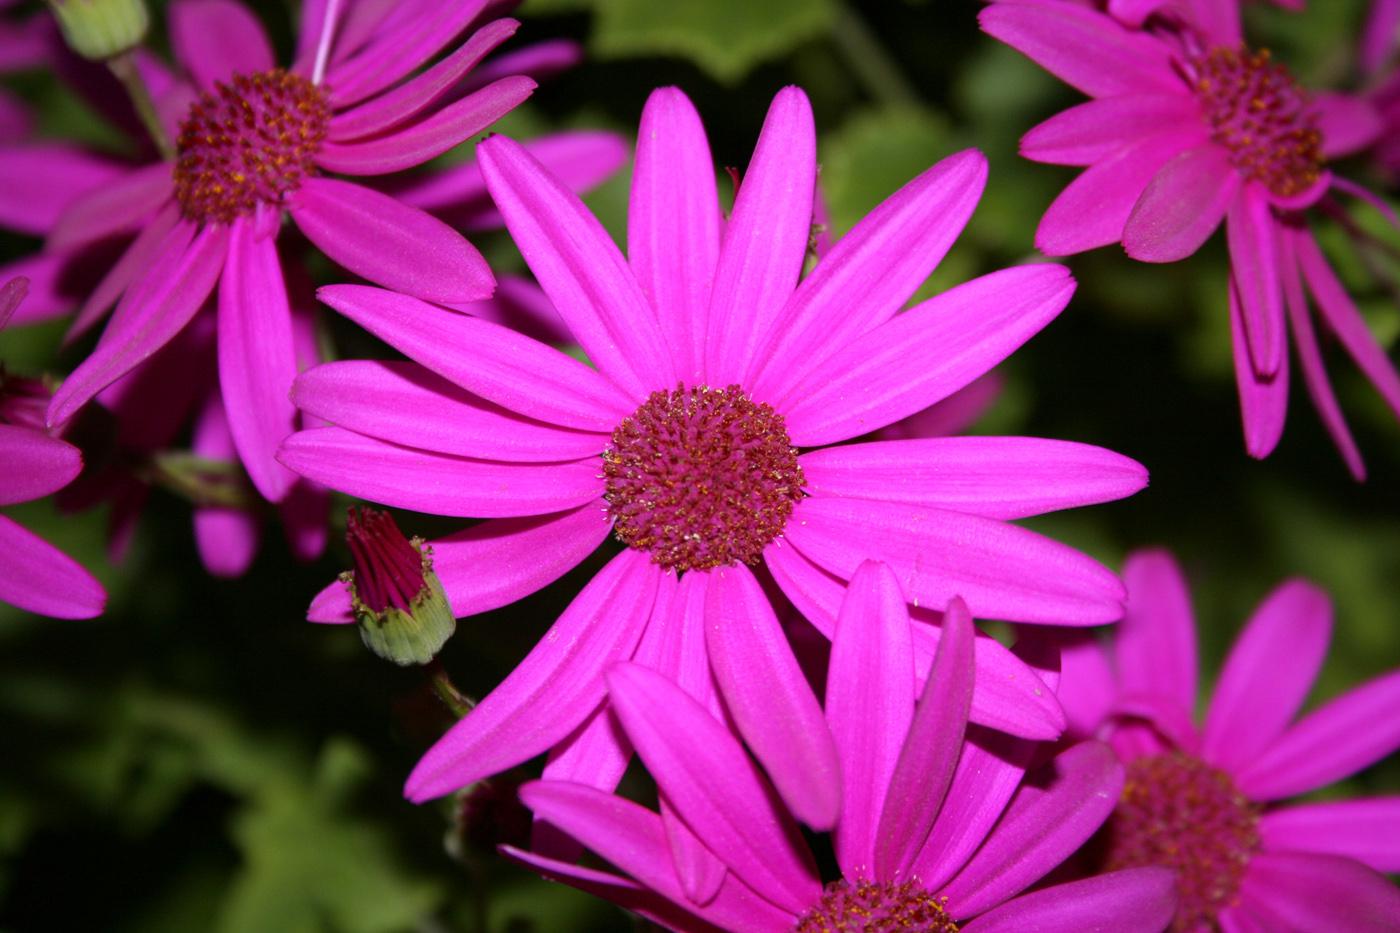 Pericallis Senetti, such as this one in almost iridescent magenta, are gorgeous, flowering plants that love early spring's cool temperatures.